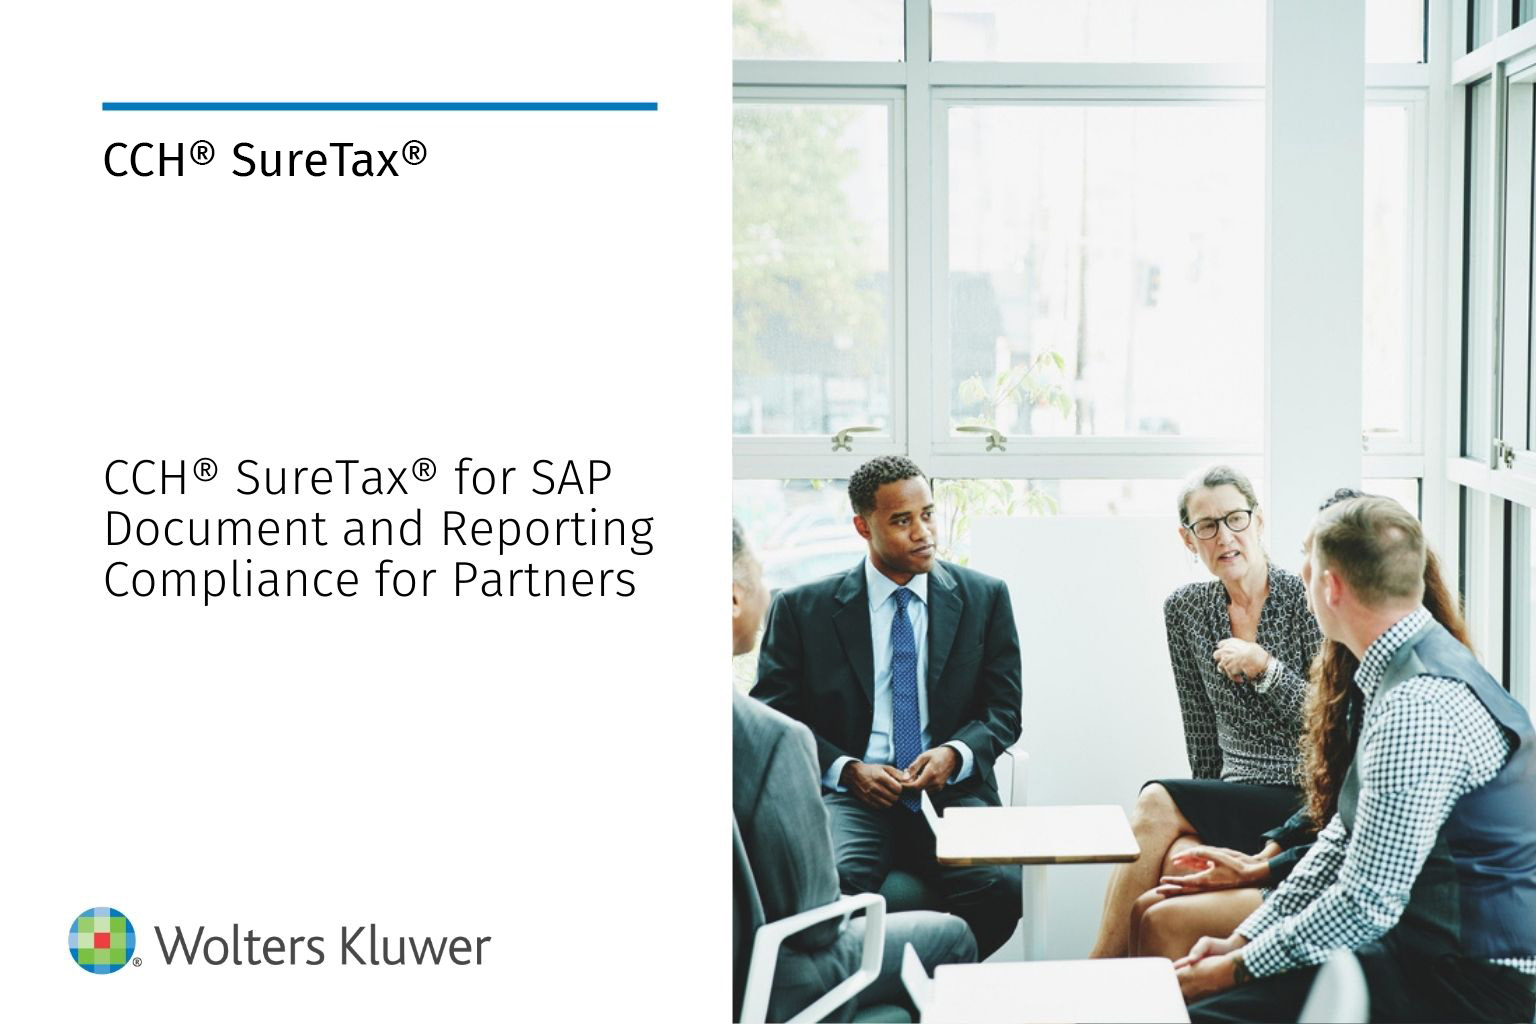 CCH® SureTax® for SAP Document and Reporting Compliance for Partners